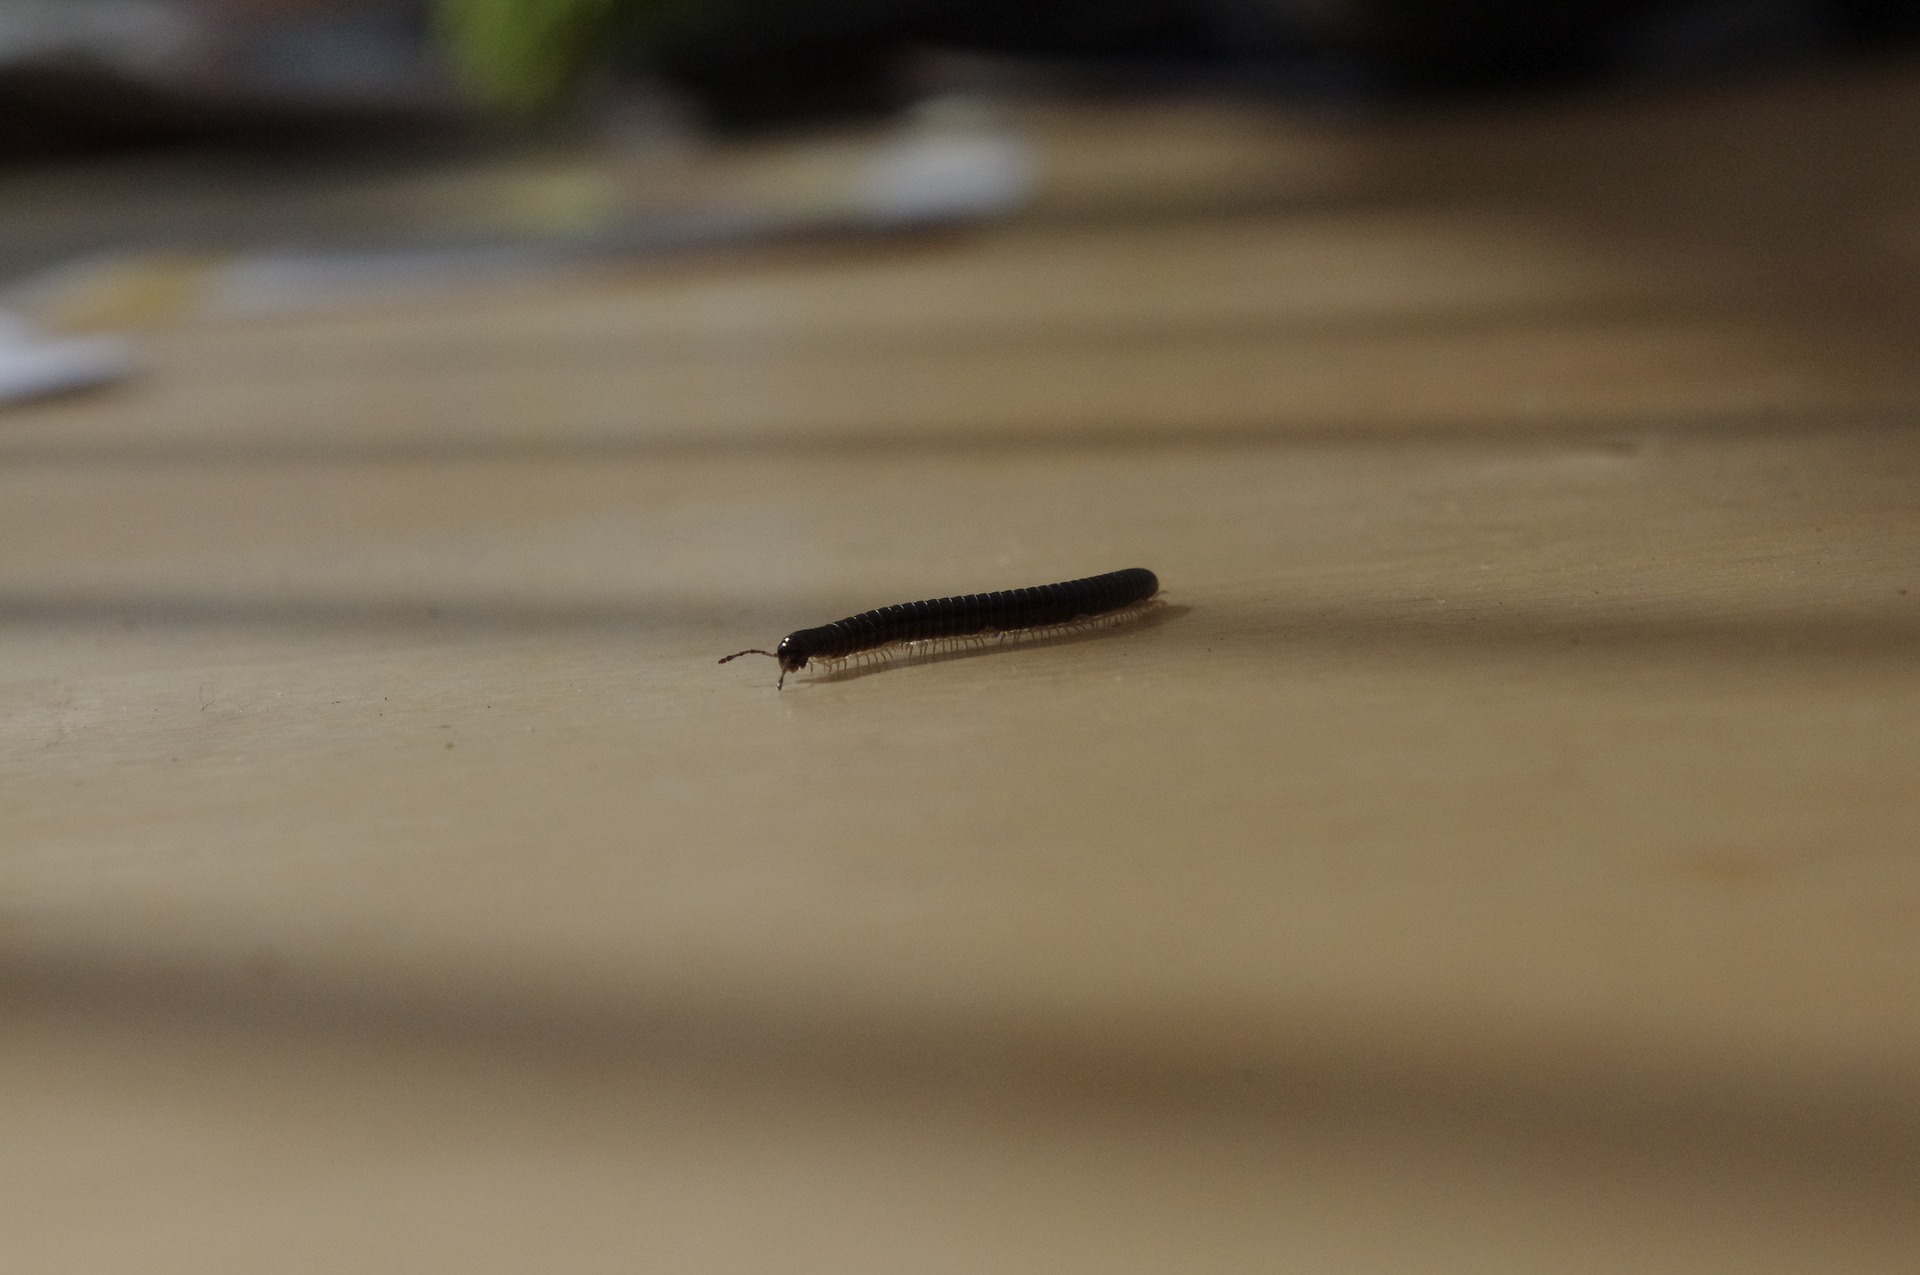 A small millipede walking across a surface.